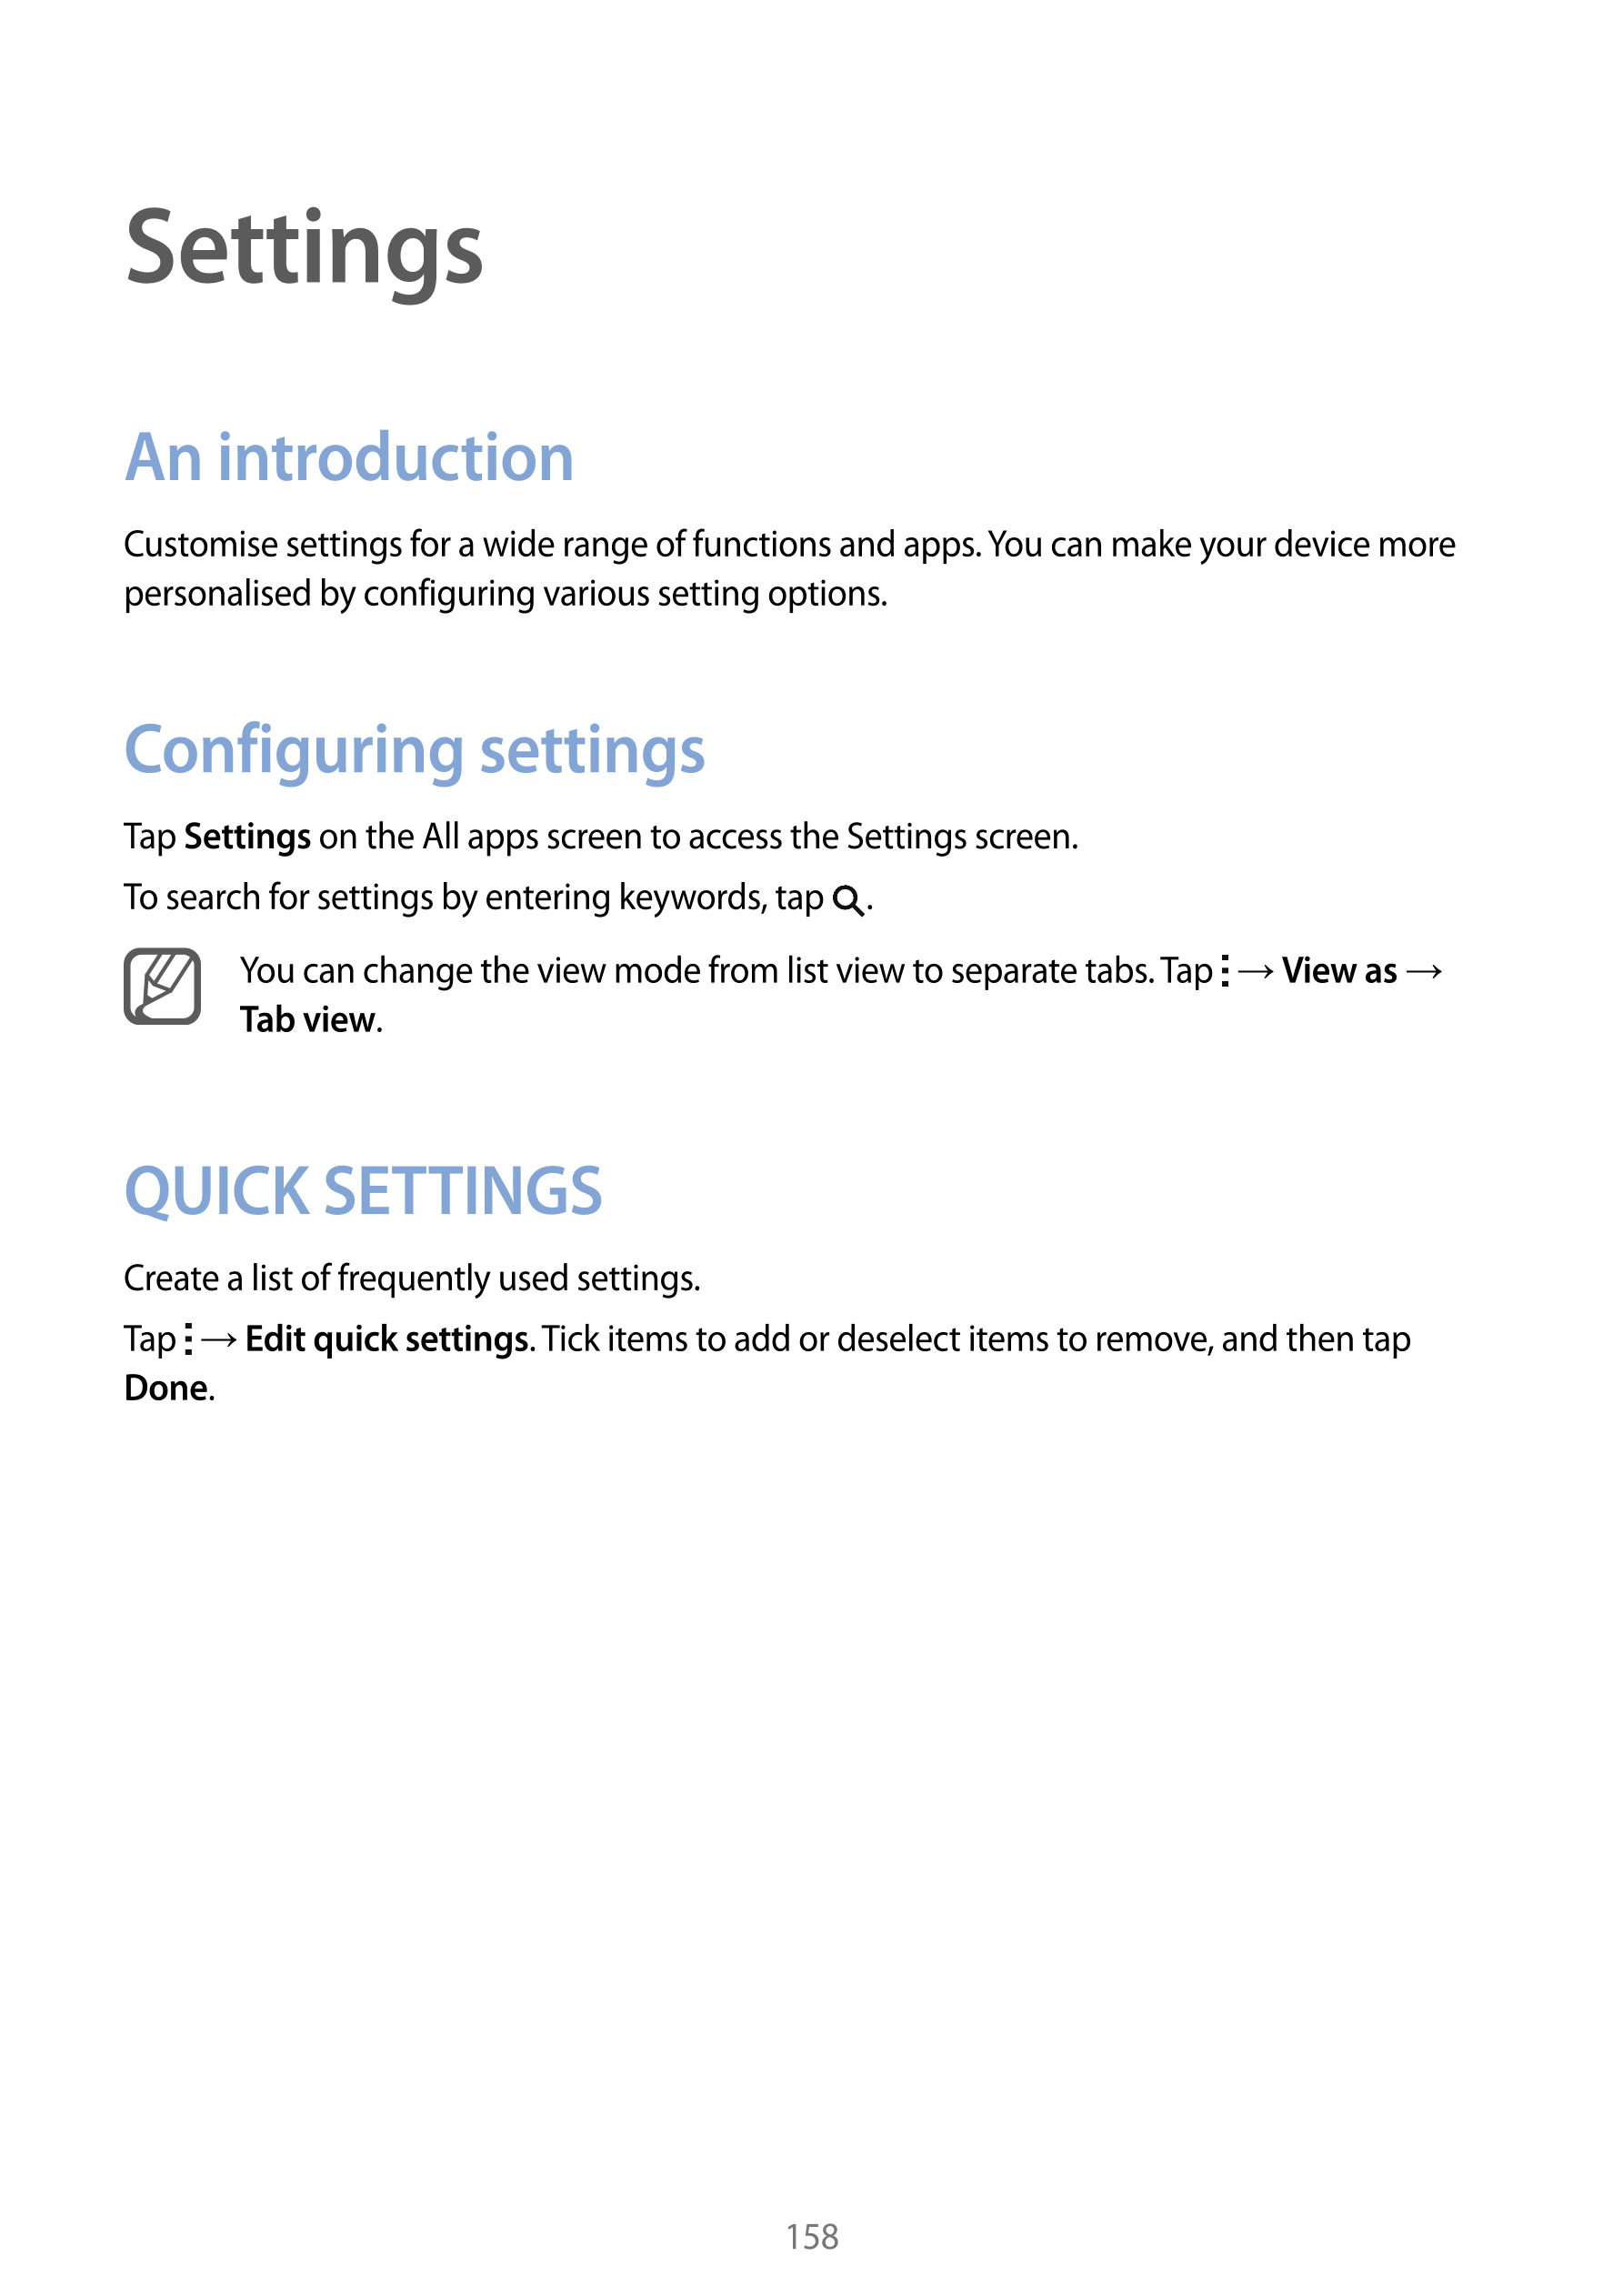 Settings
An introduction
Customise settings for a wide range of functions and apps. You can make your device more 
personalised 